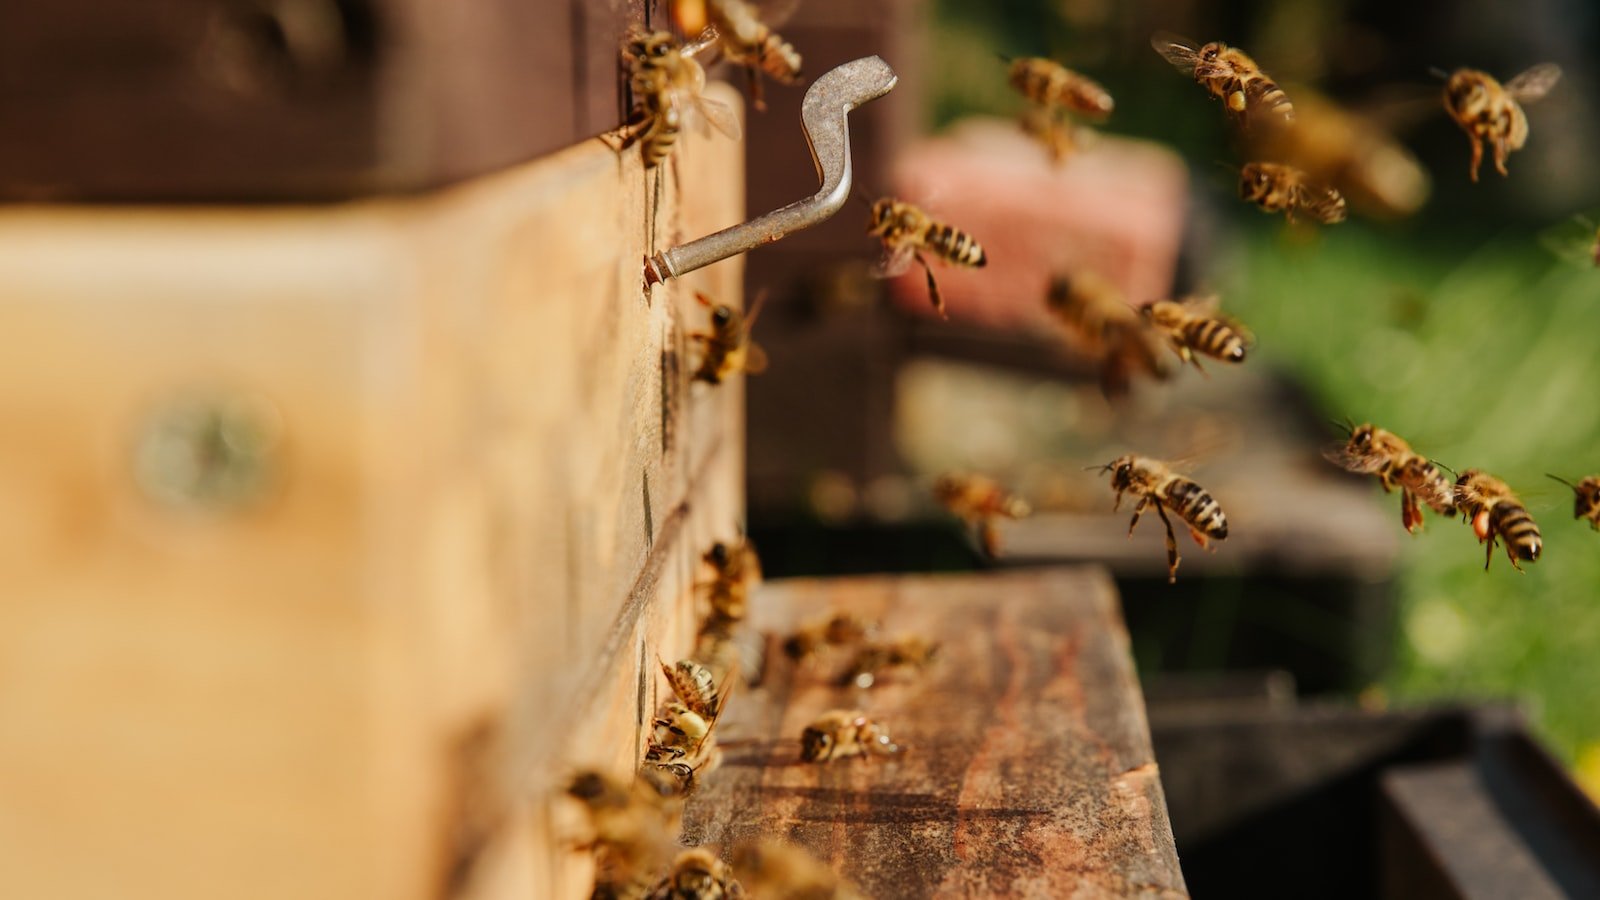 The Role of Beekeeping in Local Food Systems